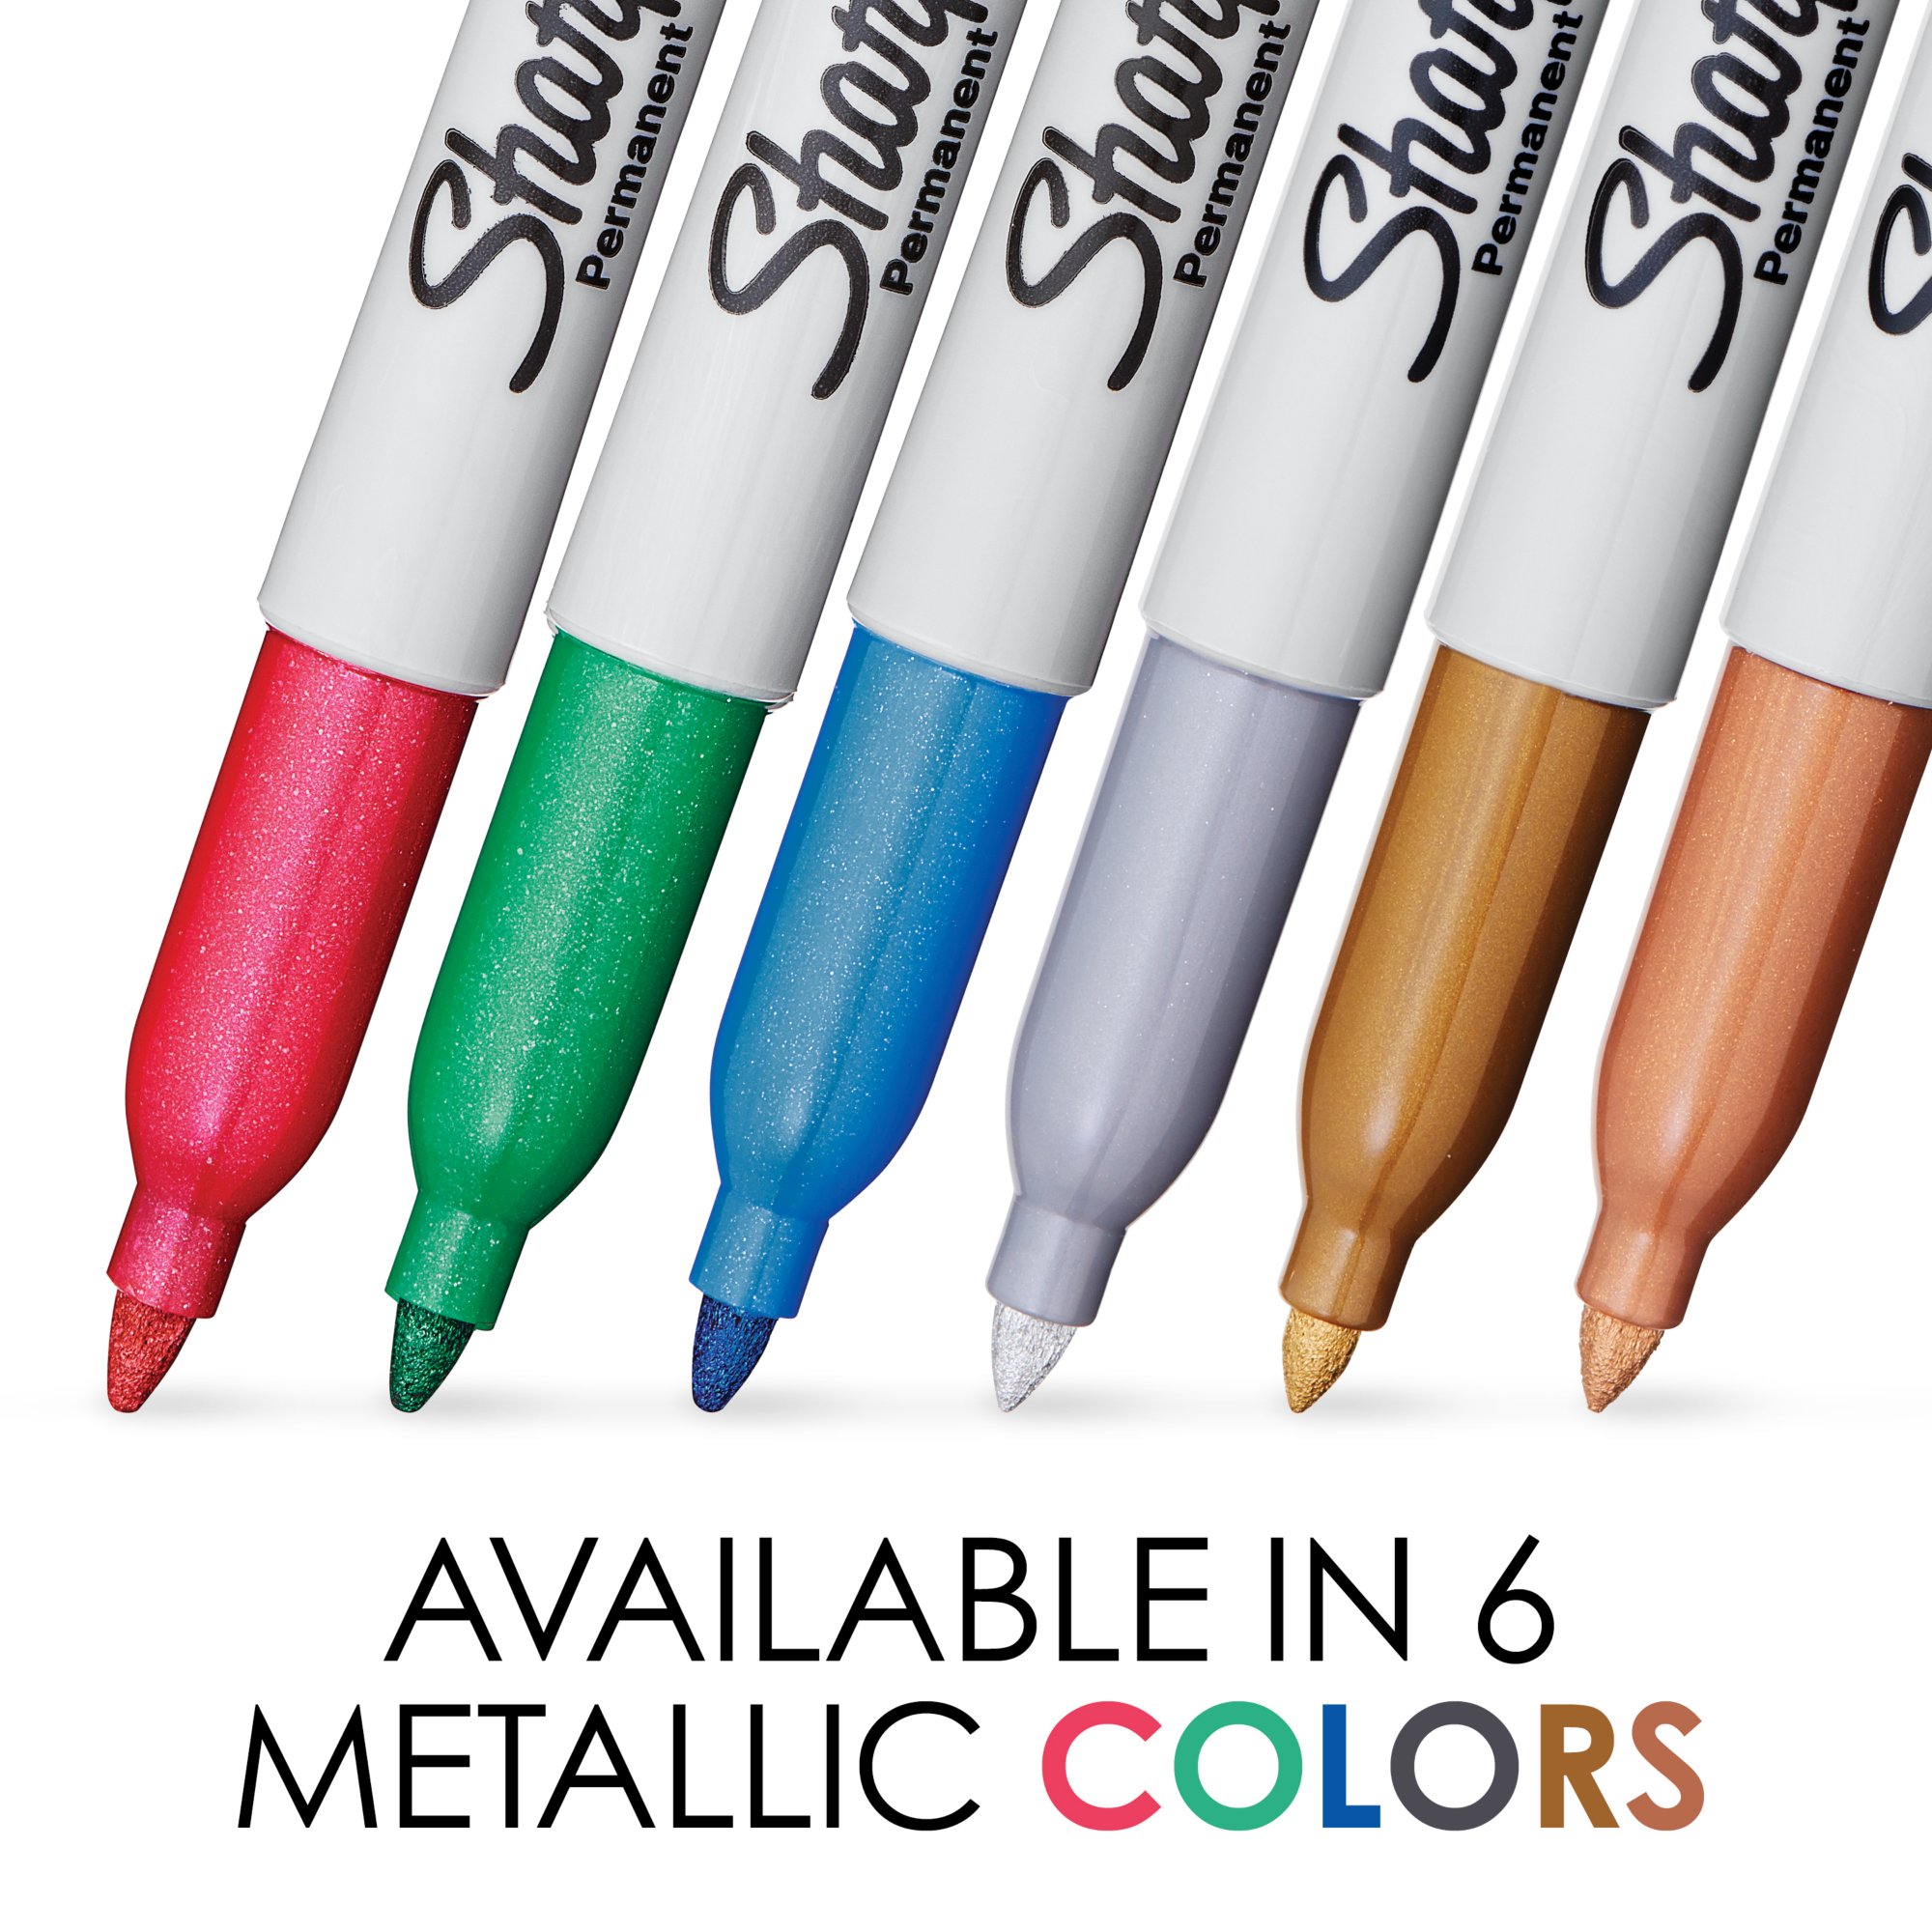 Sharpie Permanent Marker, Fine Point, Assorted Metallic Colors - 3 markers